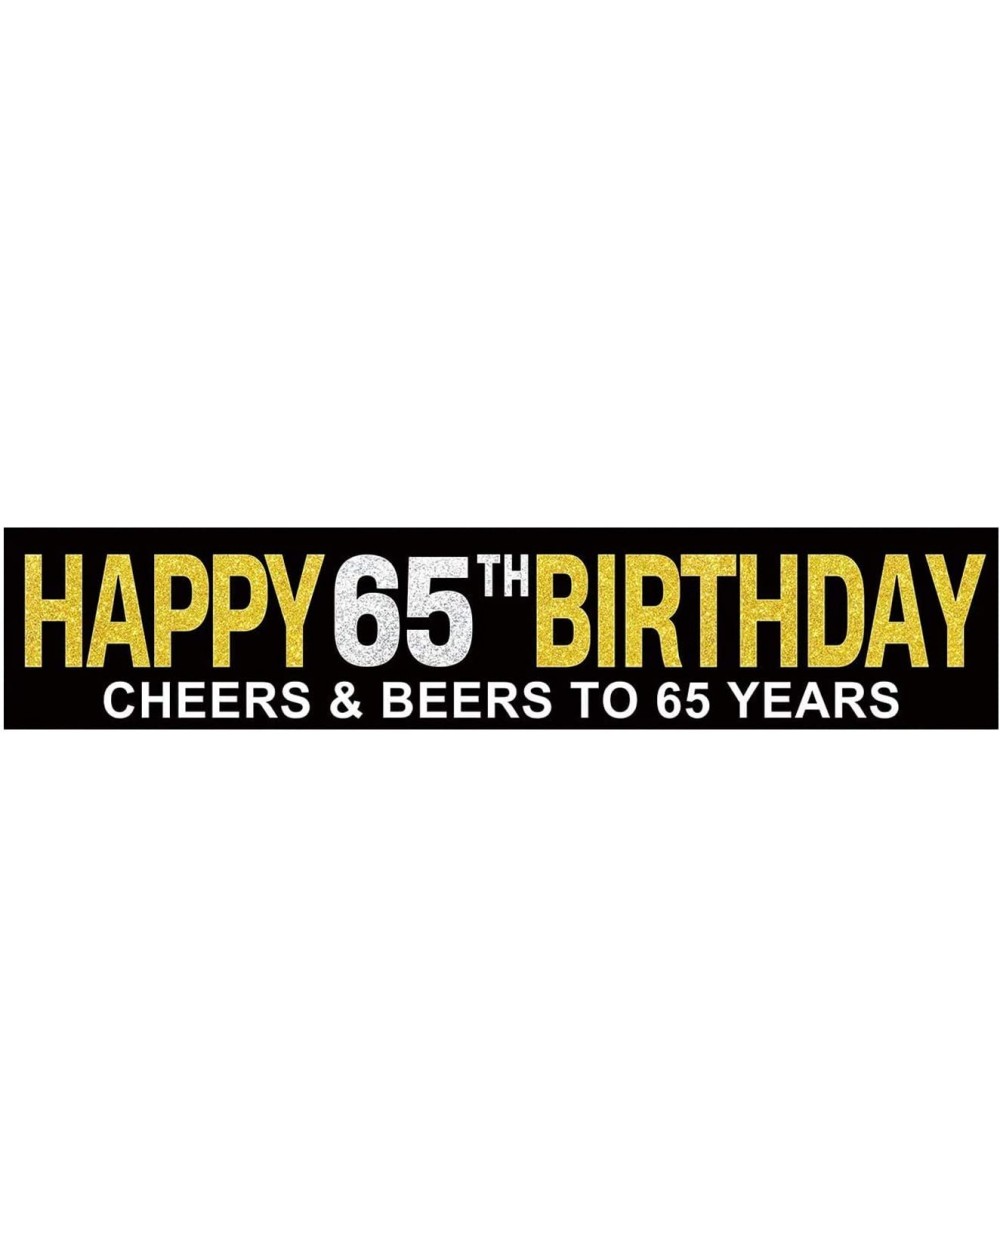 Banners Large Happy 65th Birthday Banner- Cheers & Beers to 65 Years- Birthday Hanging Banner- Celebration Flag- Birthday Par...